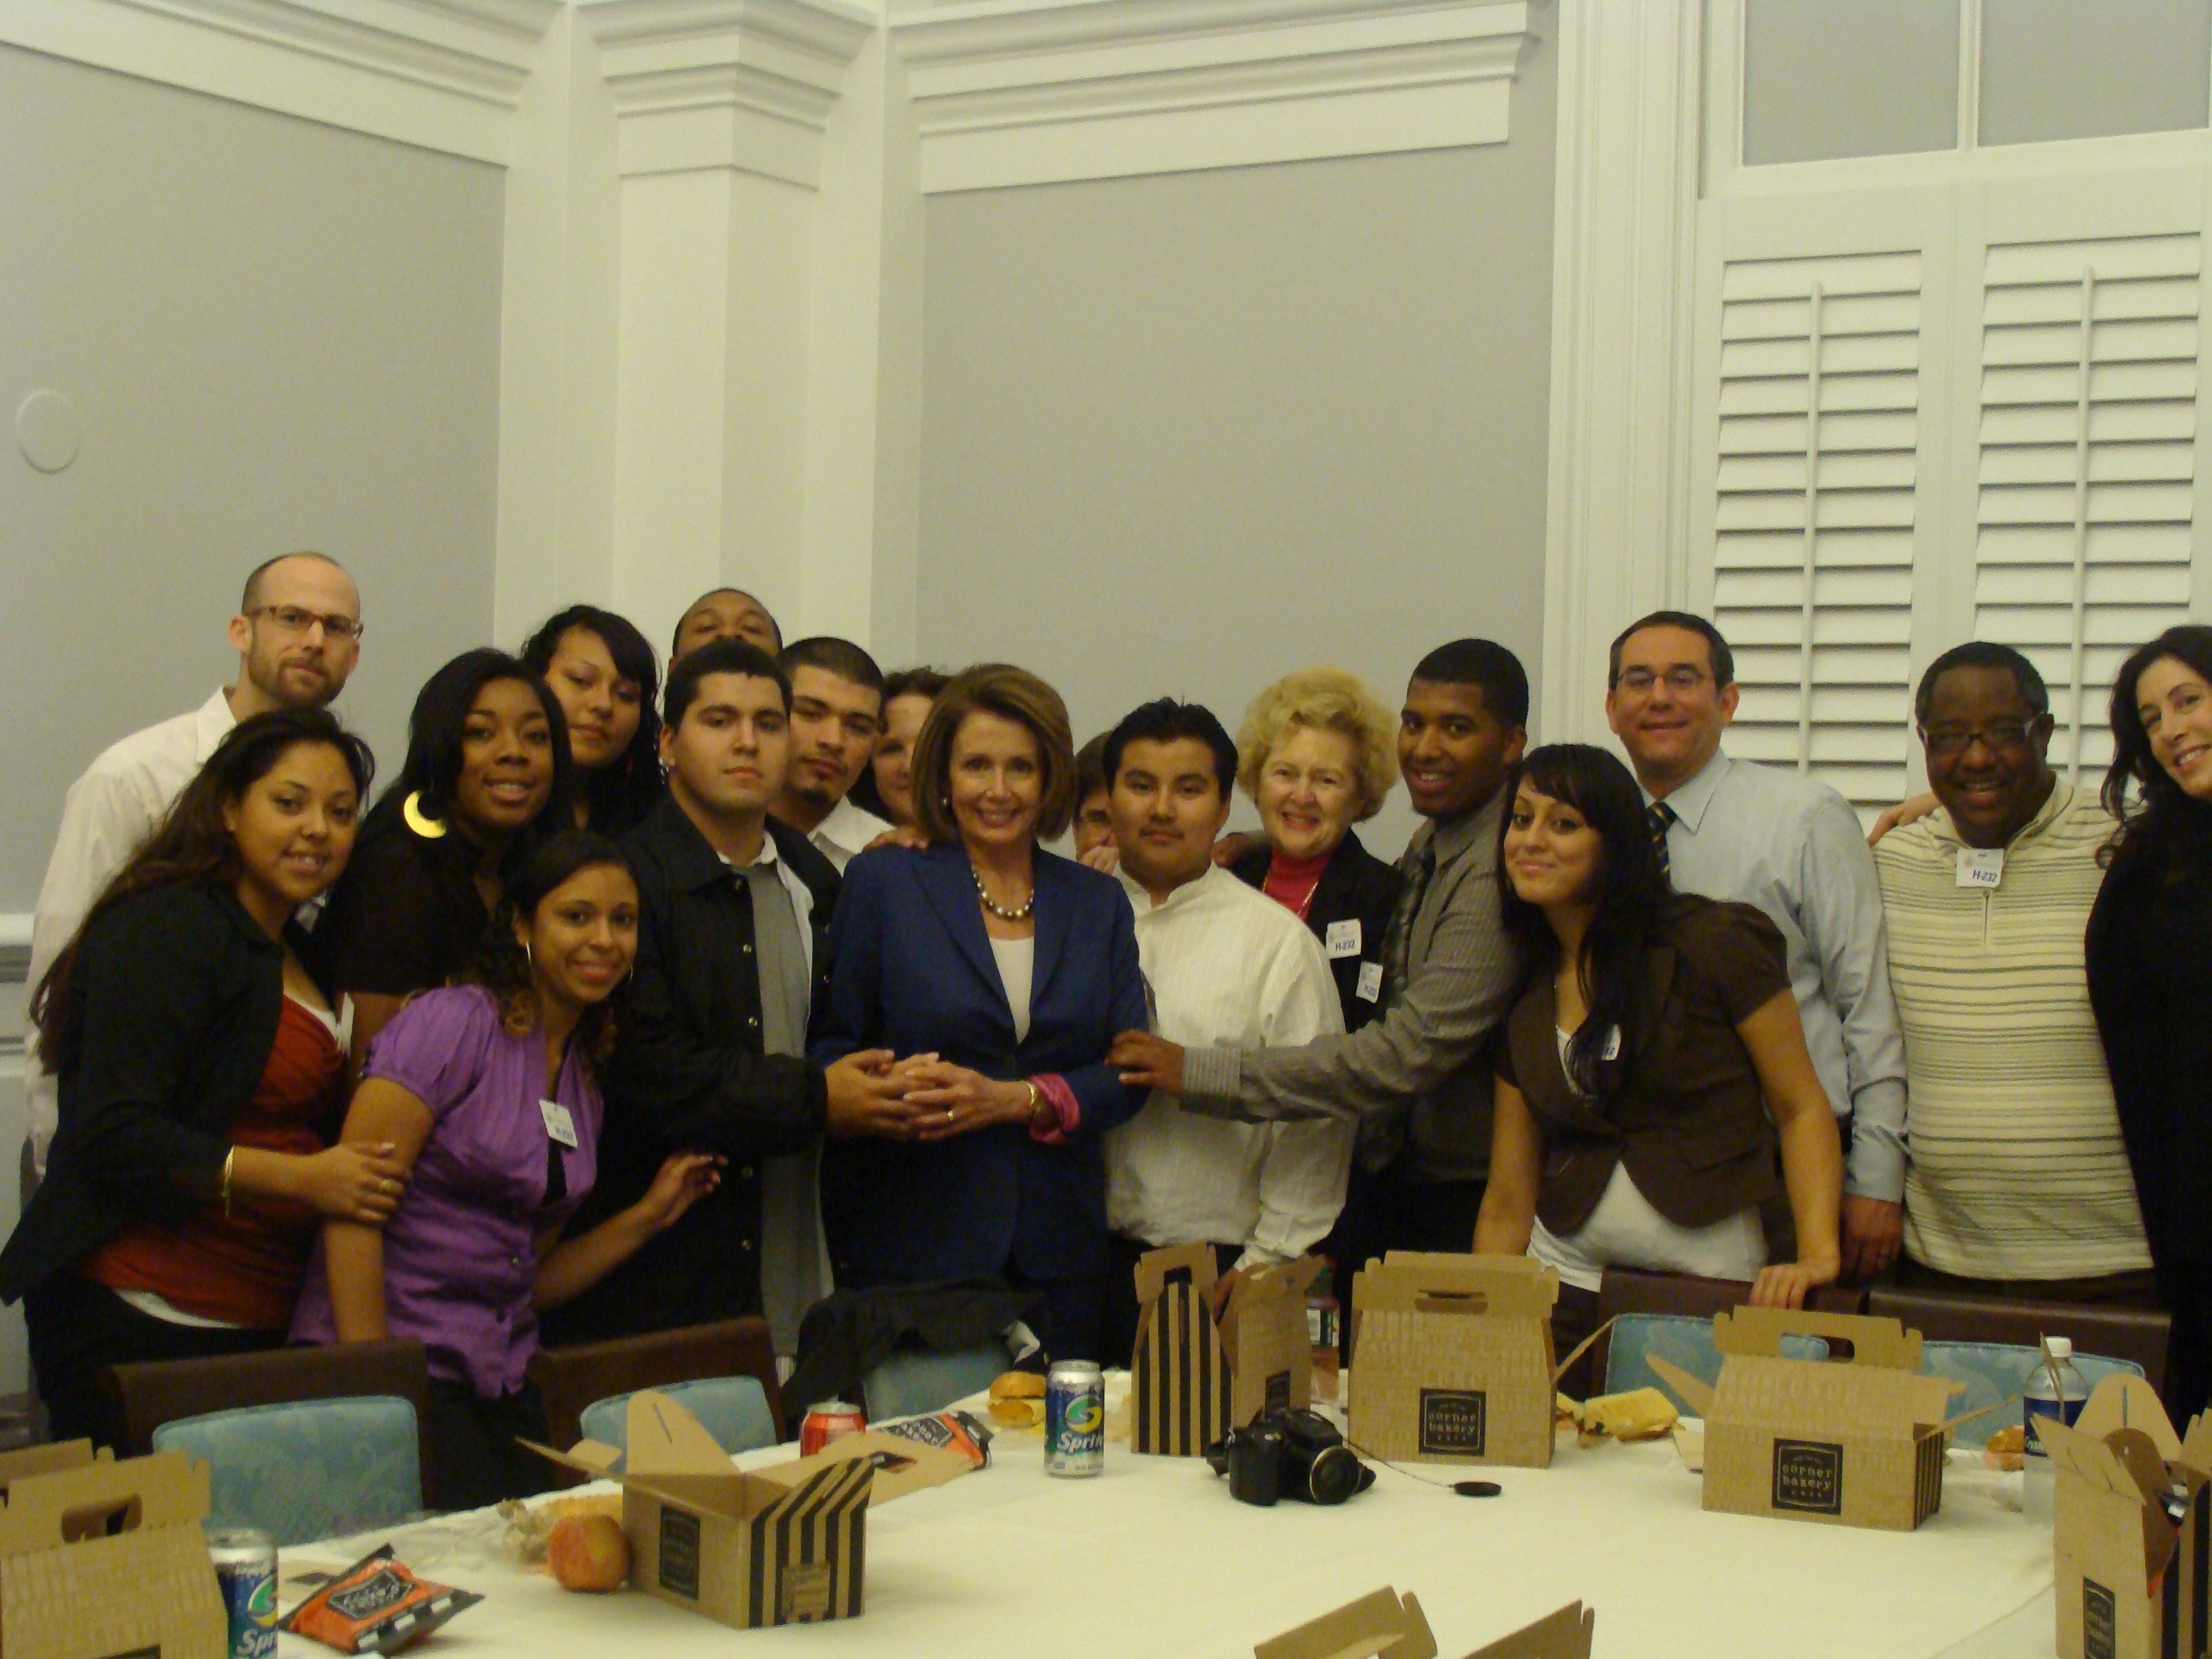 Congresswoman Pelosi meets with students from the Life Learning Academy